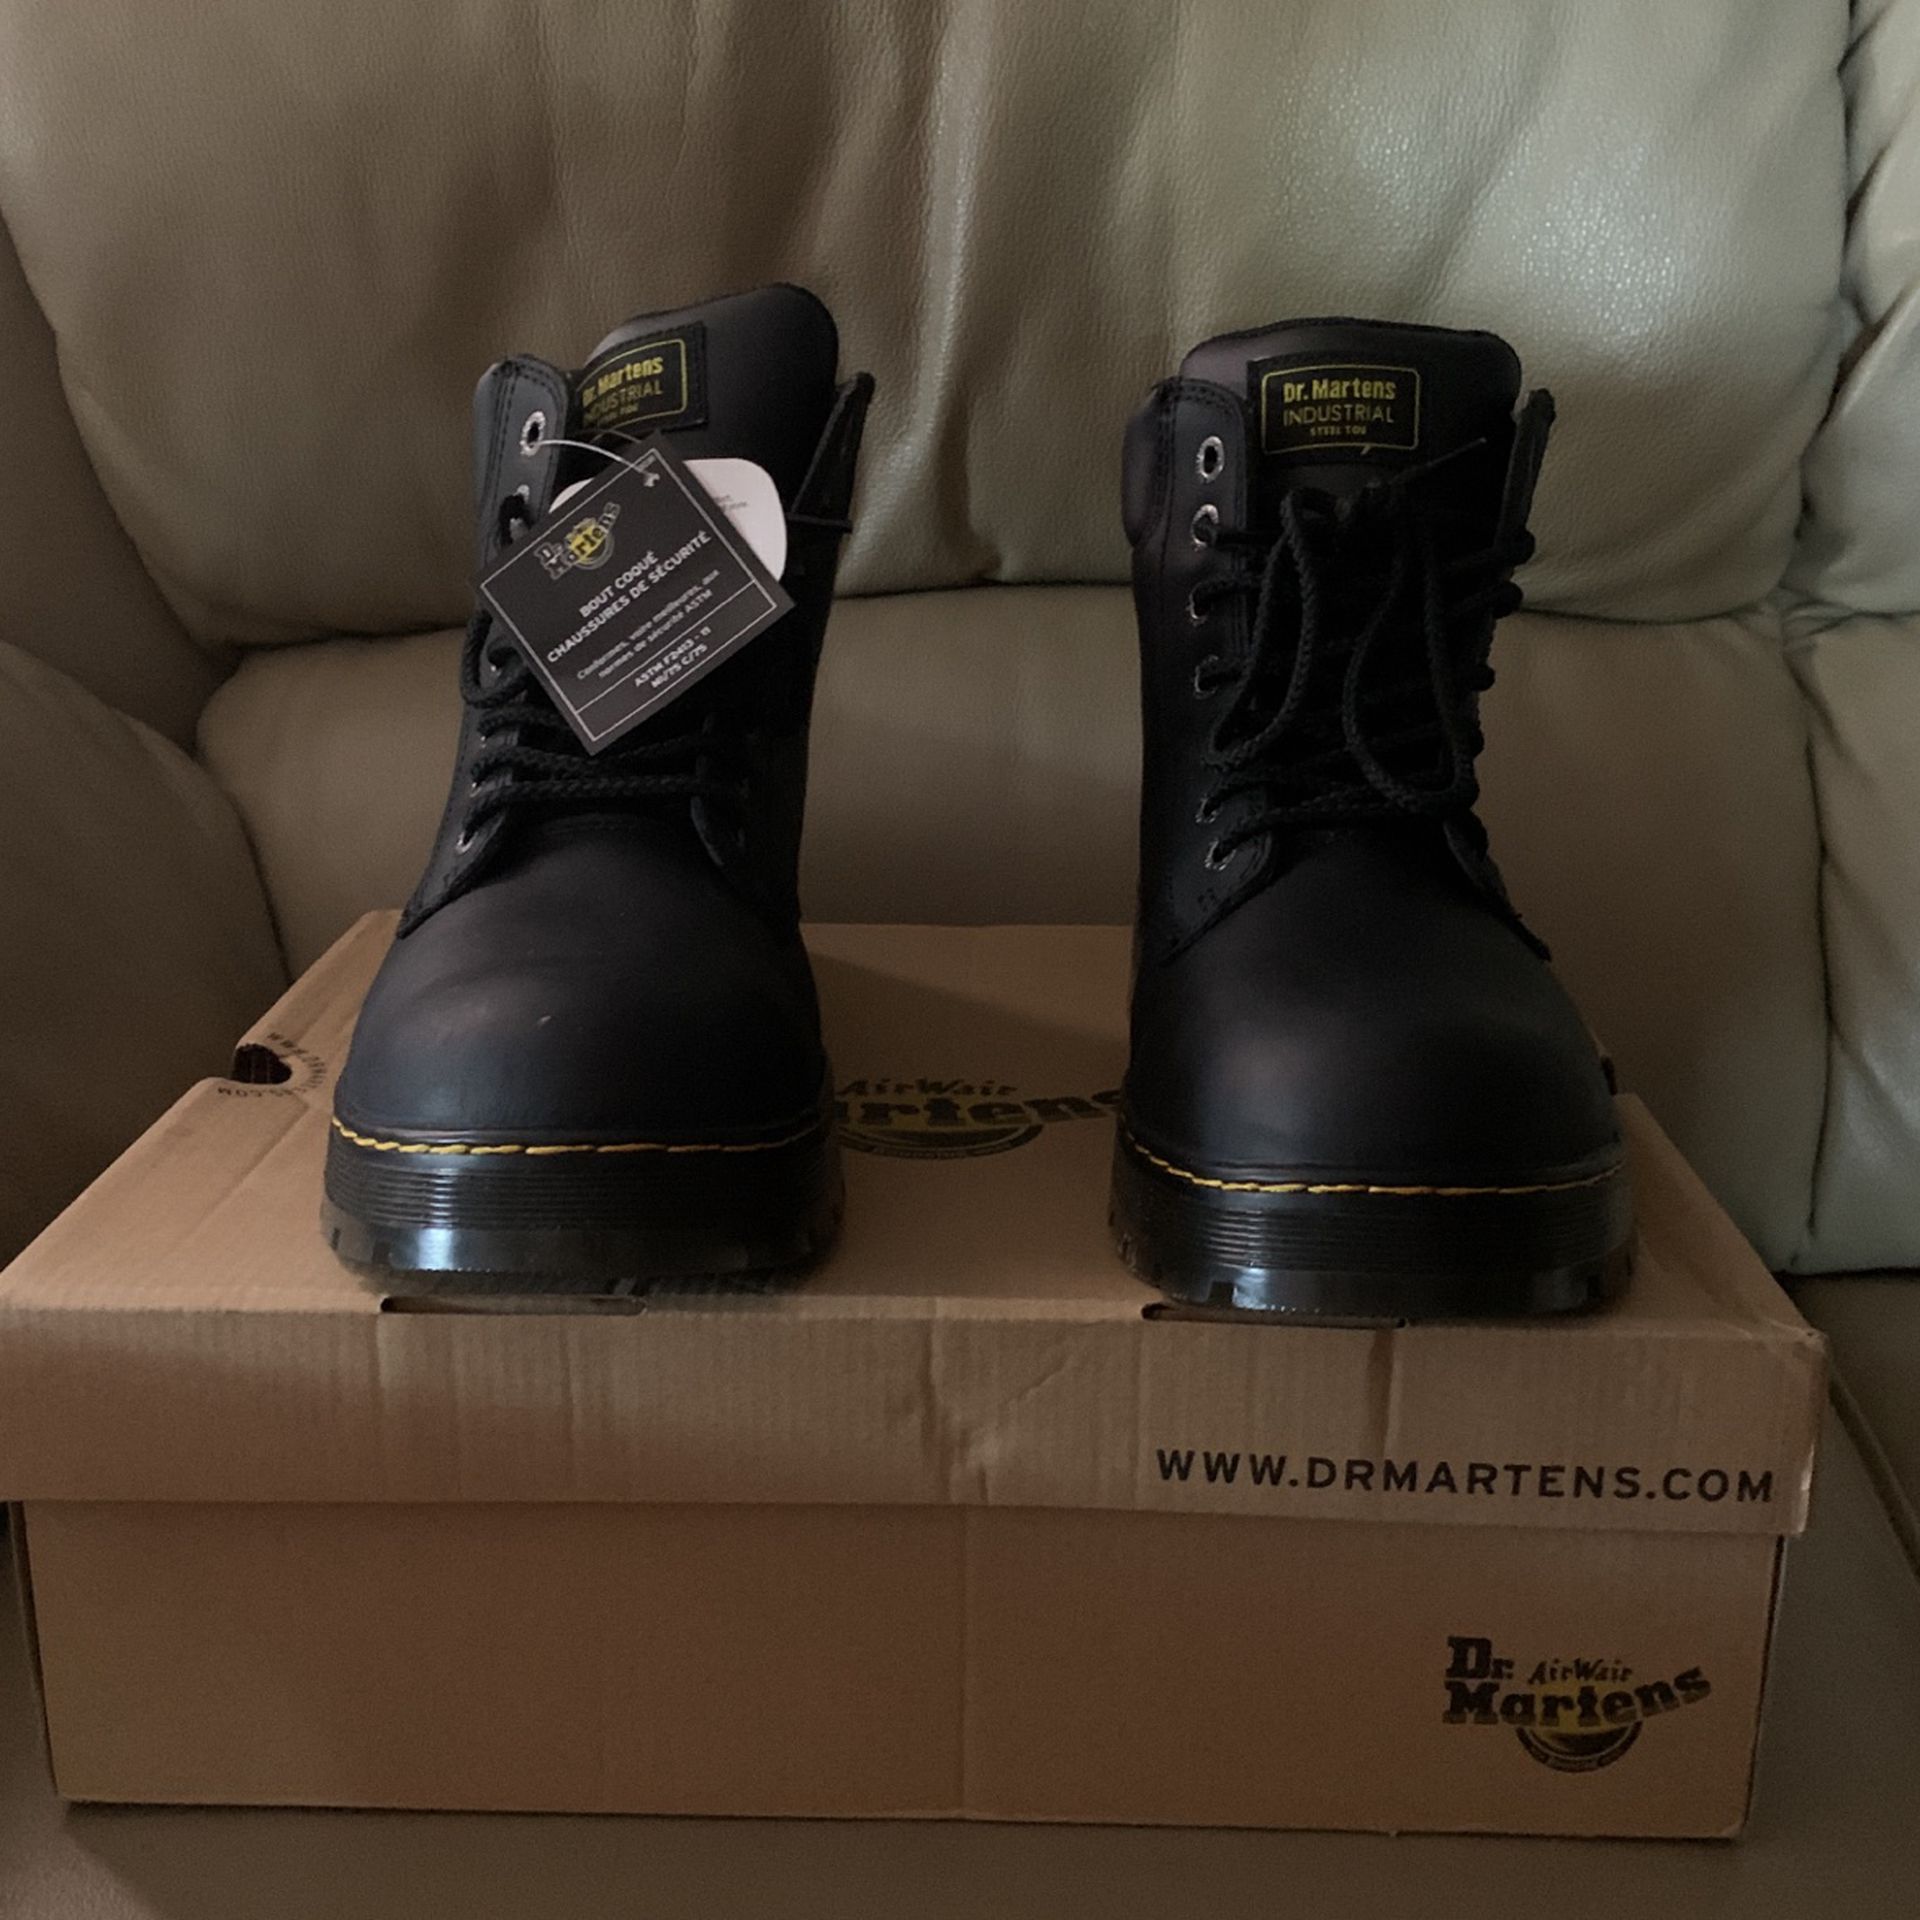 Dr. Martens Steel Toed Work Boots